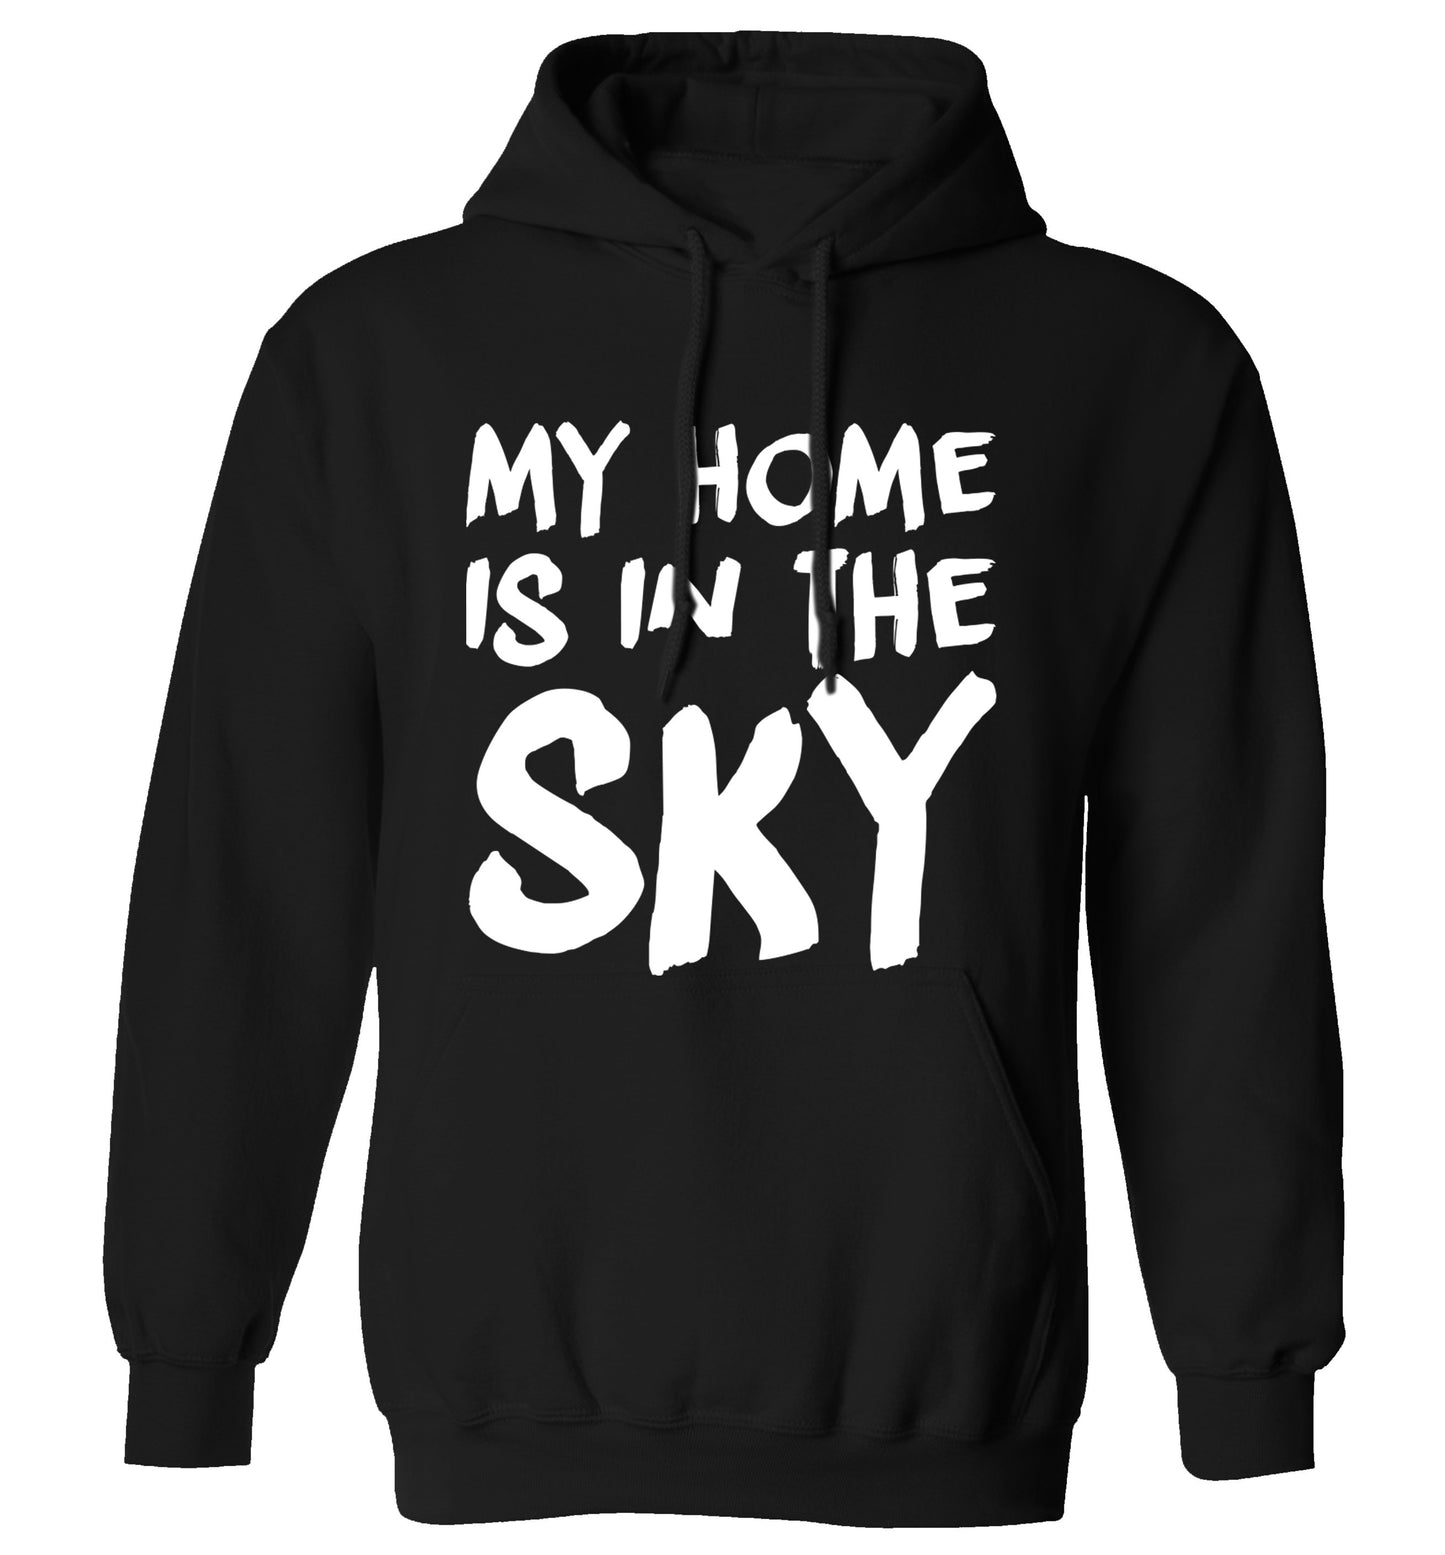 My home is in the sky adults unisex black hoodie 2XL